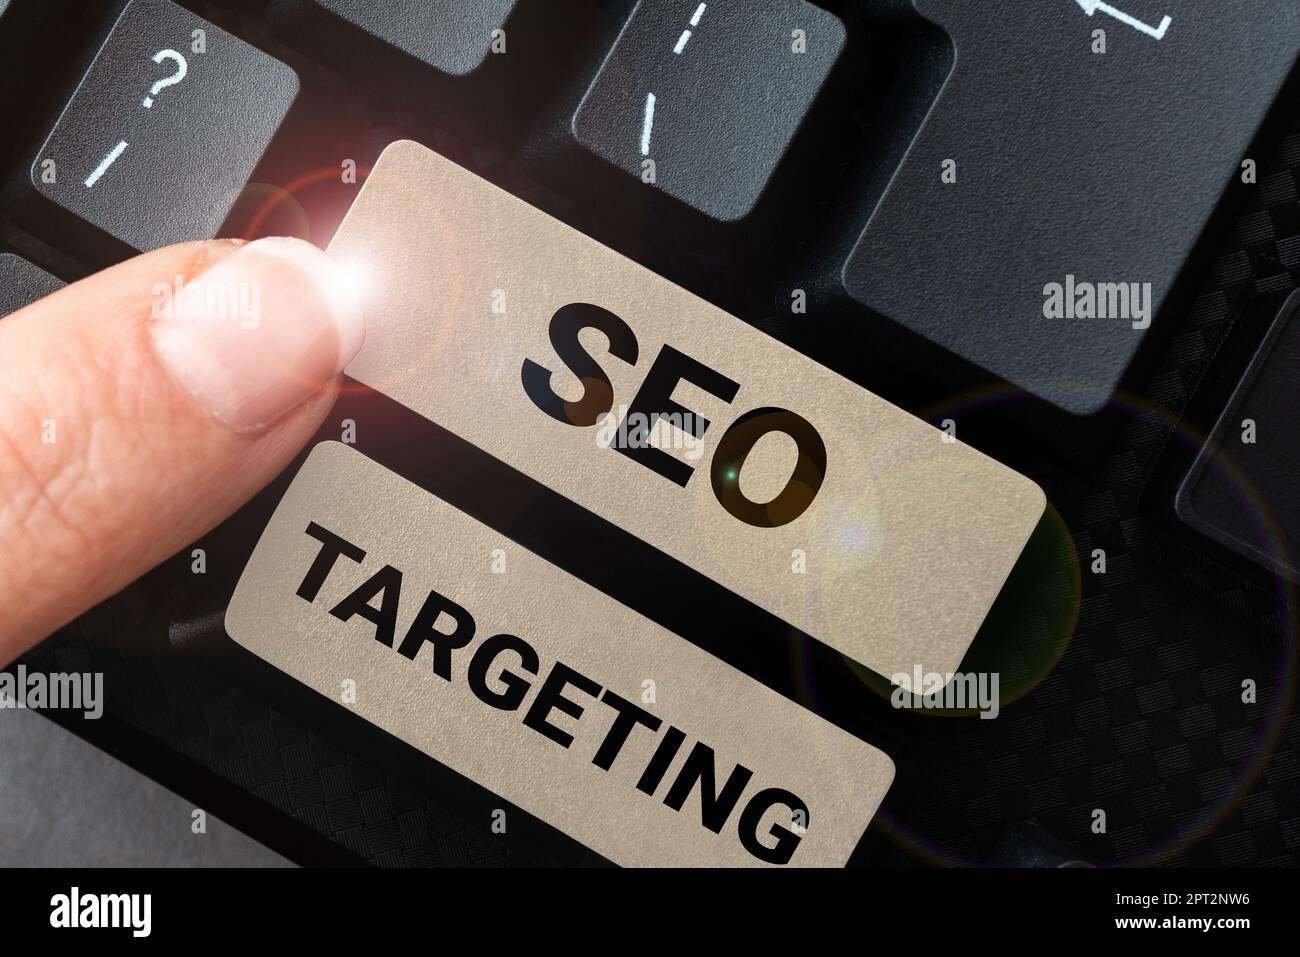 Sign displaying Seo Targeting, Business approach Specific Keywords for Location Landing Page Top Domain Stock Photo